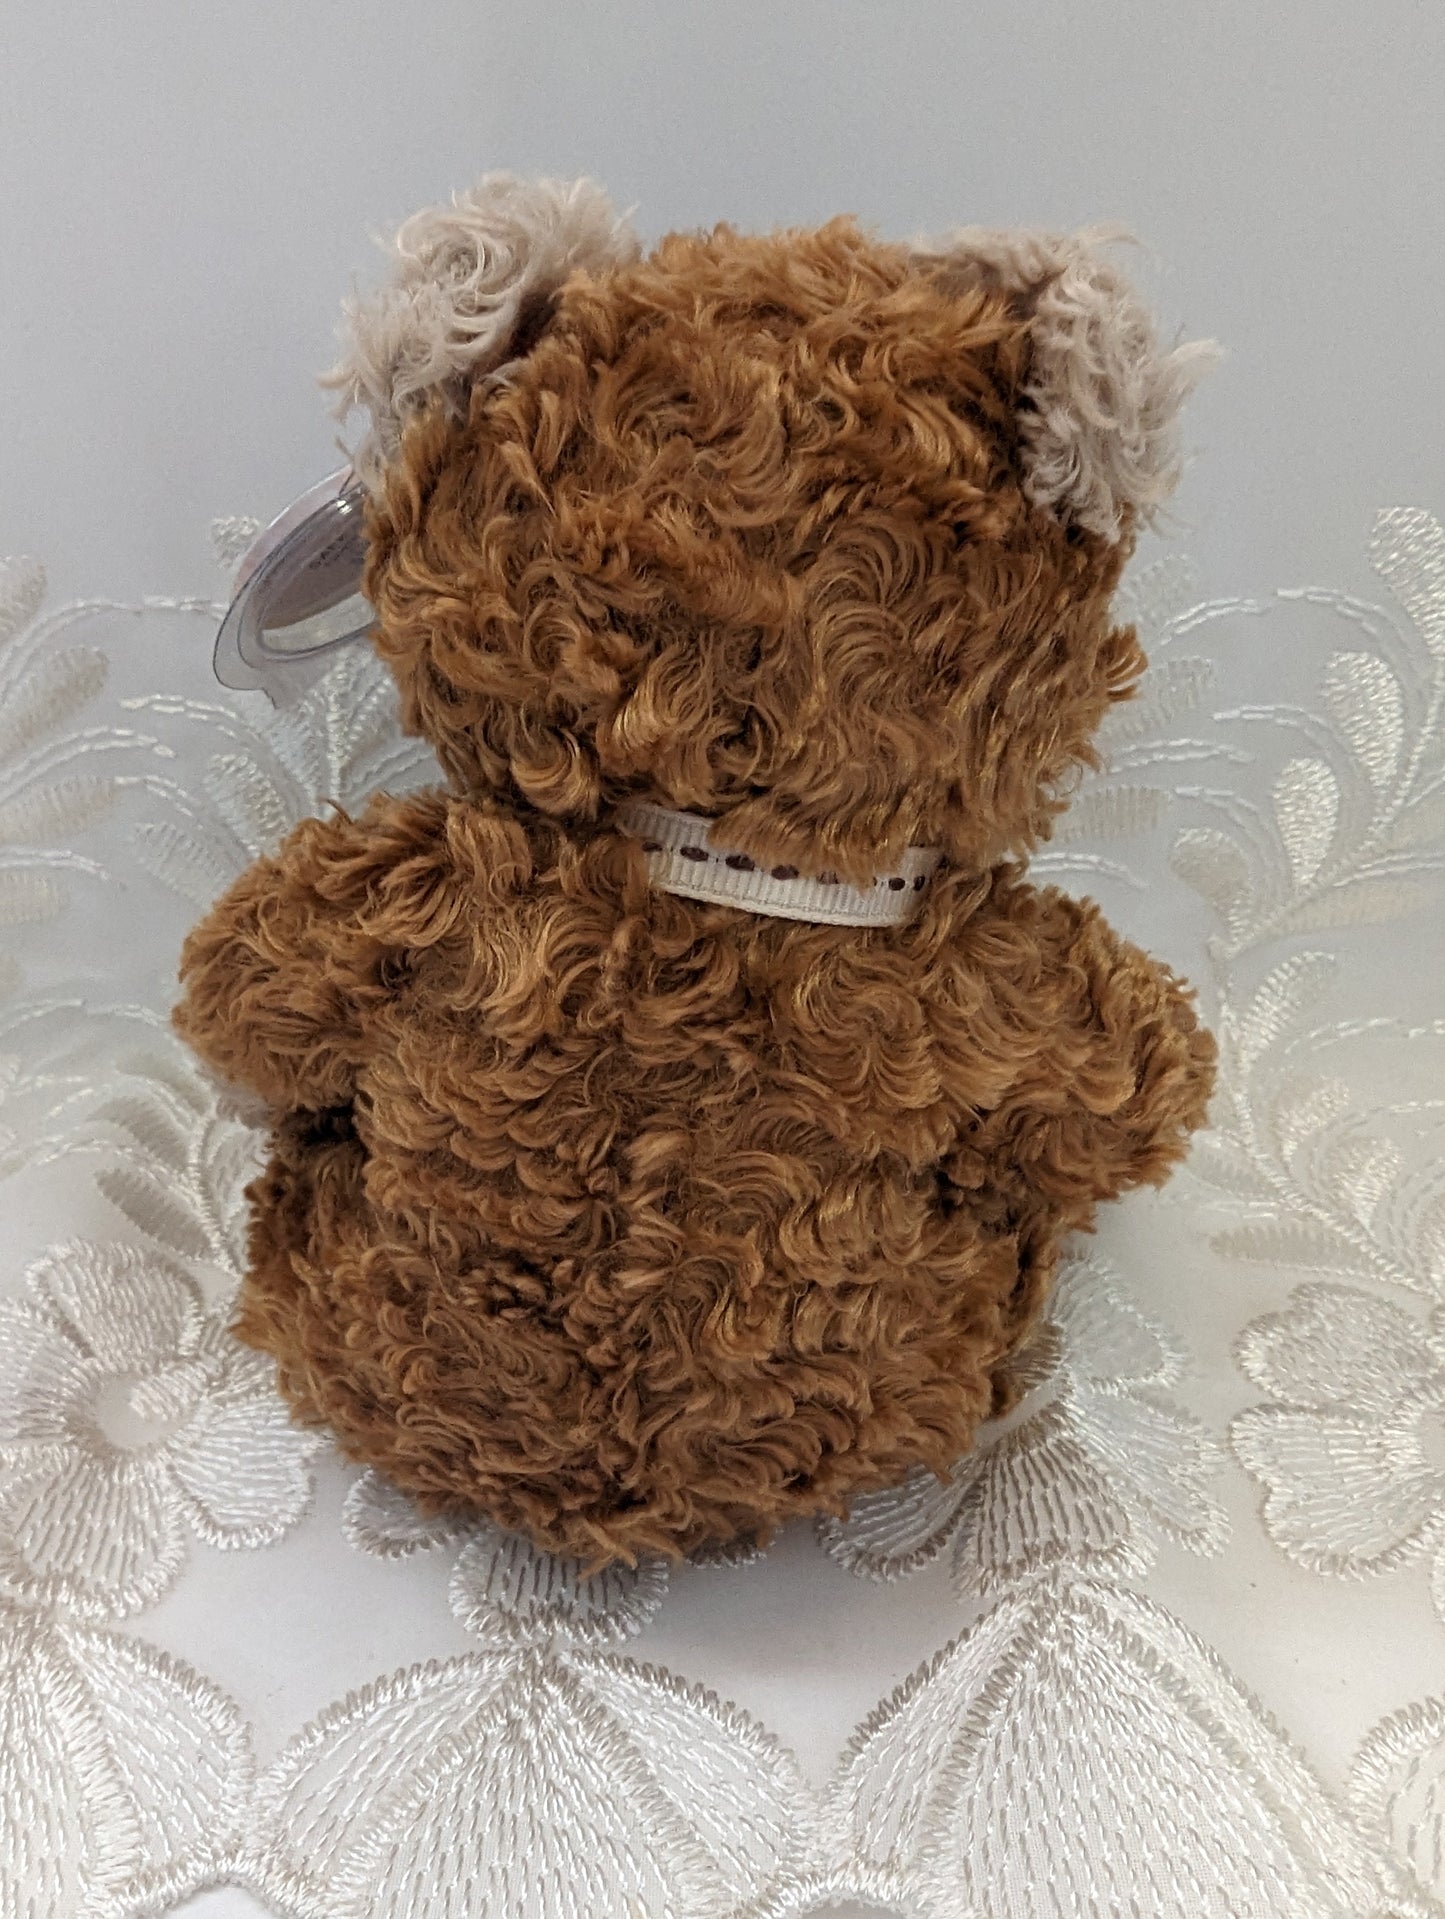 Ty Beanie Baby - Whittle The Brown Bear (6in) - Vintage Beanies Canada